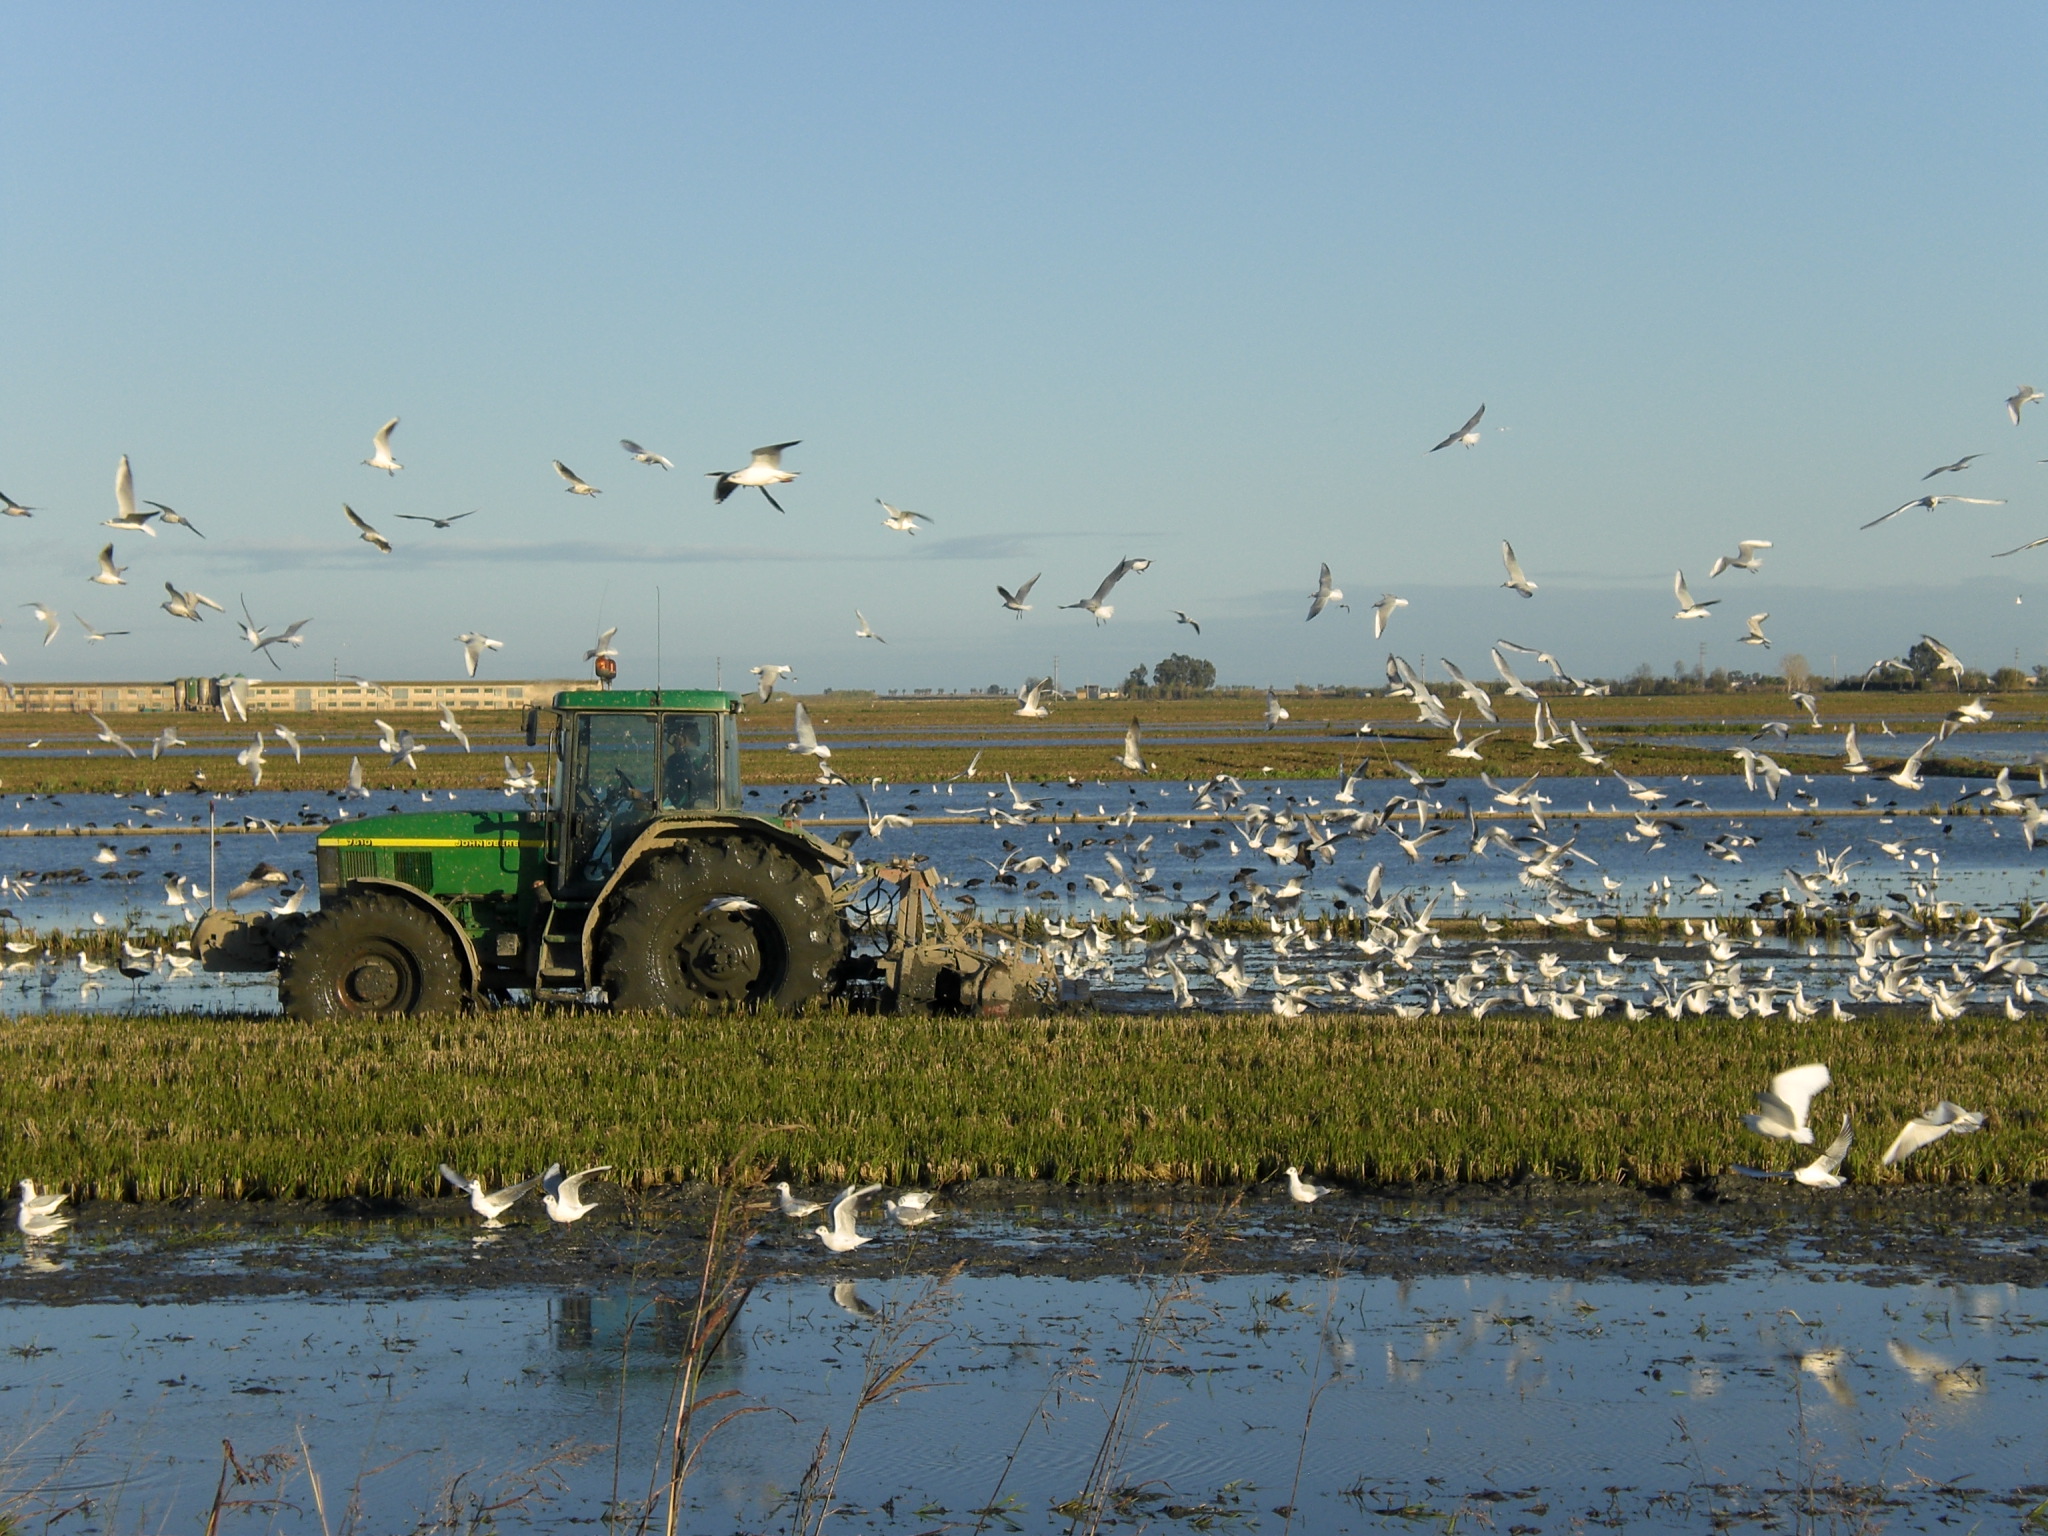 The tractor passing through the rice field with birds flying overhead